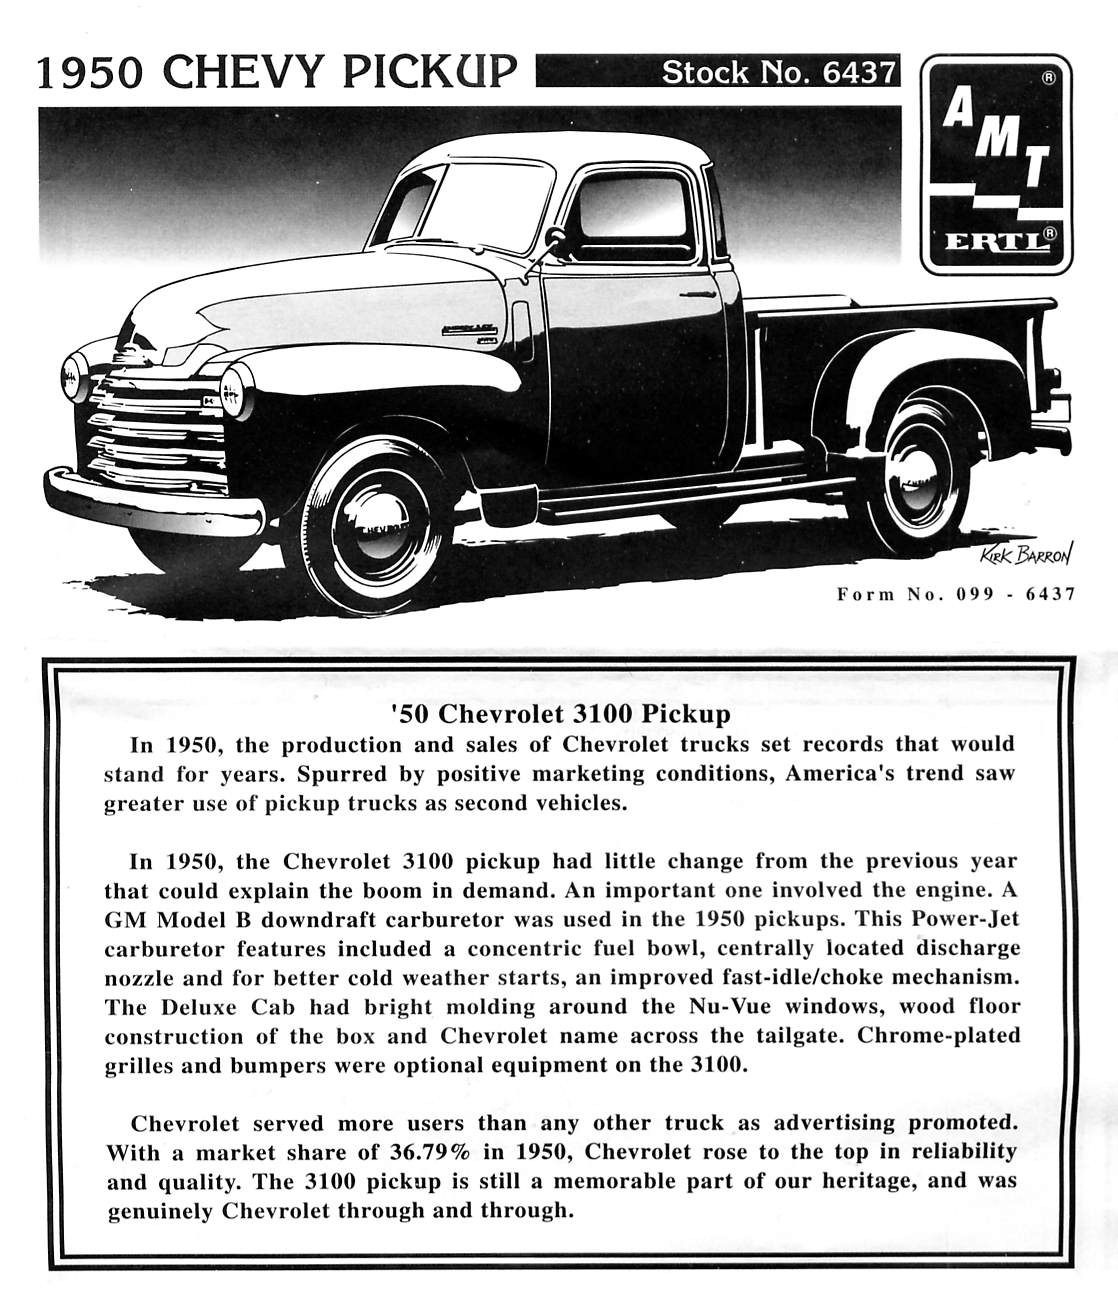 Photo: 1950 Chevrolet 3100 Pick Up Page 1 | AMT 1950 Chevrolet 3100 Pickup  album | DRASTIC PLASTICS MODEL CAR CLUB , photo and video  sharing made easy.